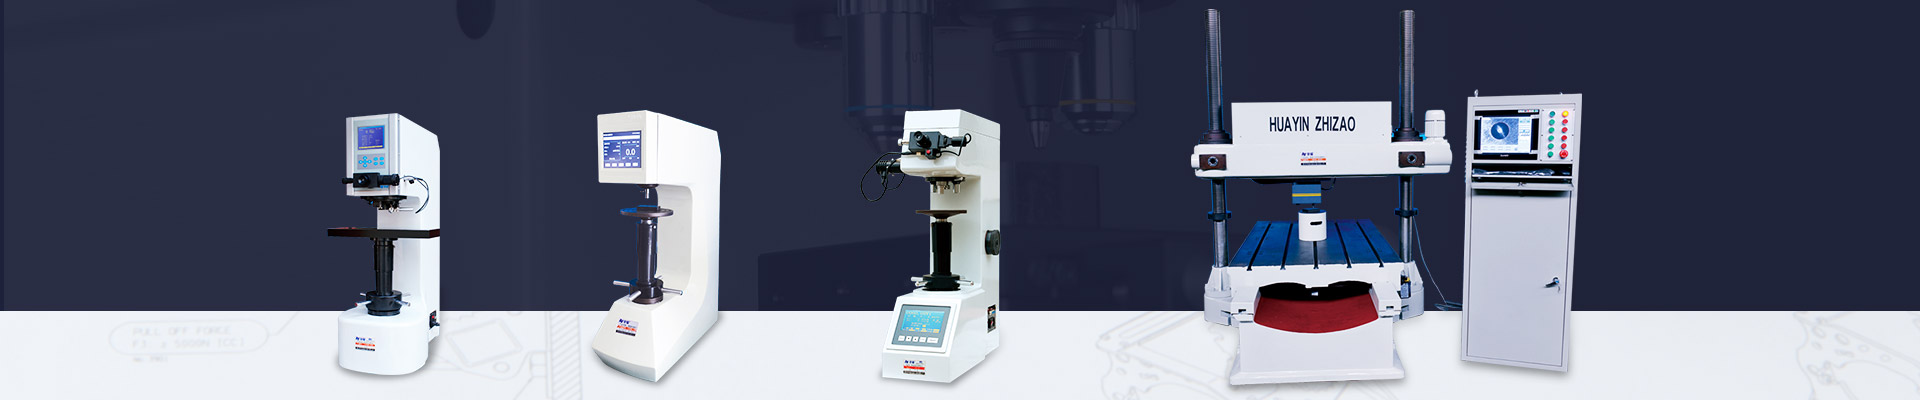 Vickers Hardness Tester